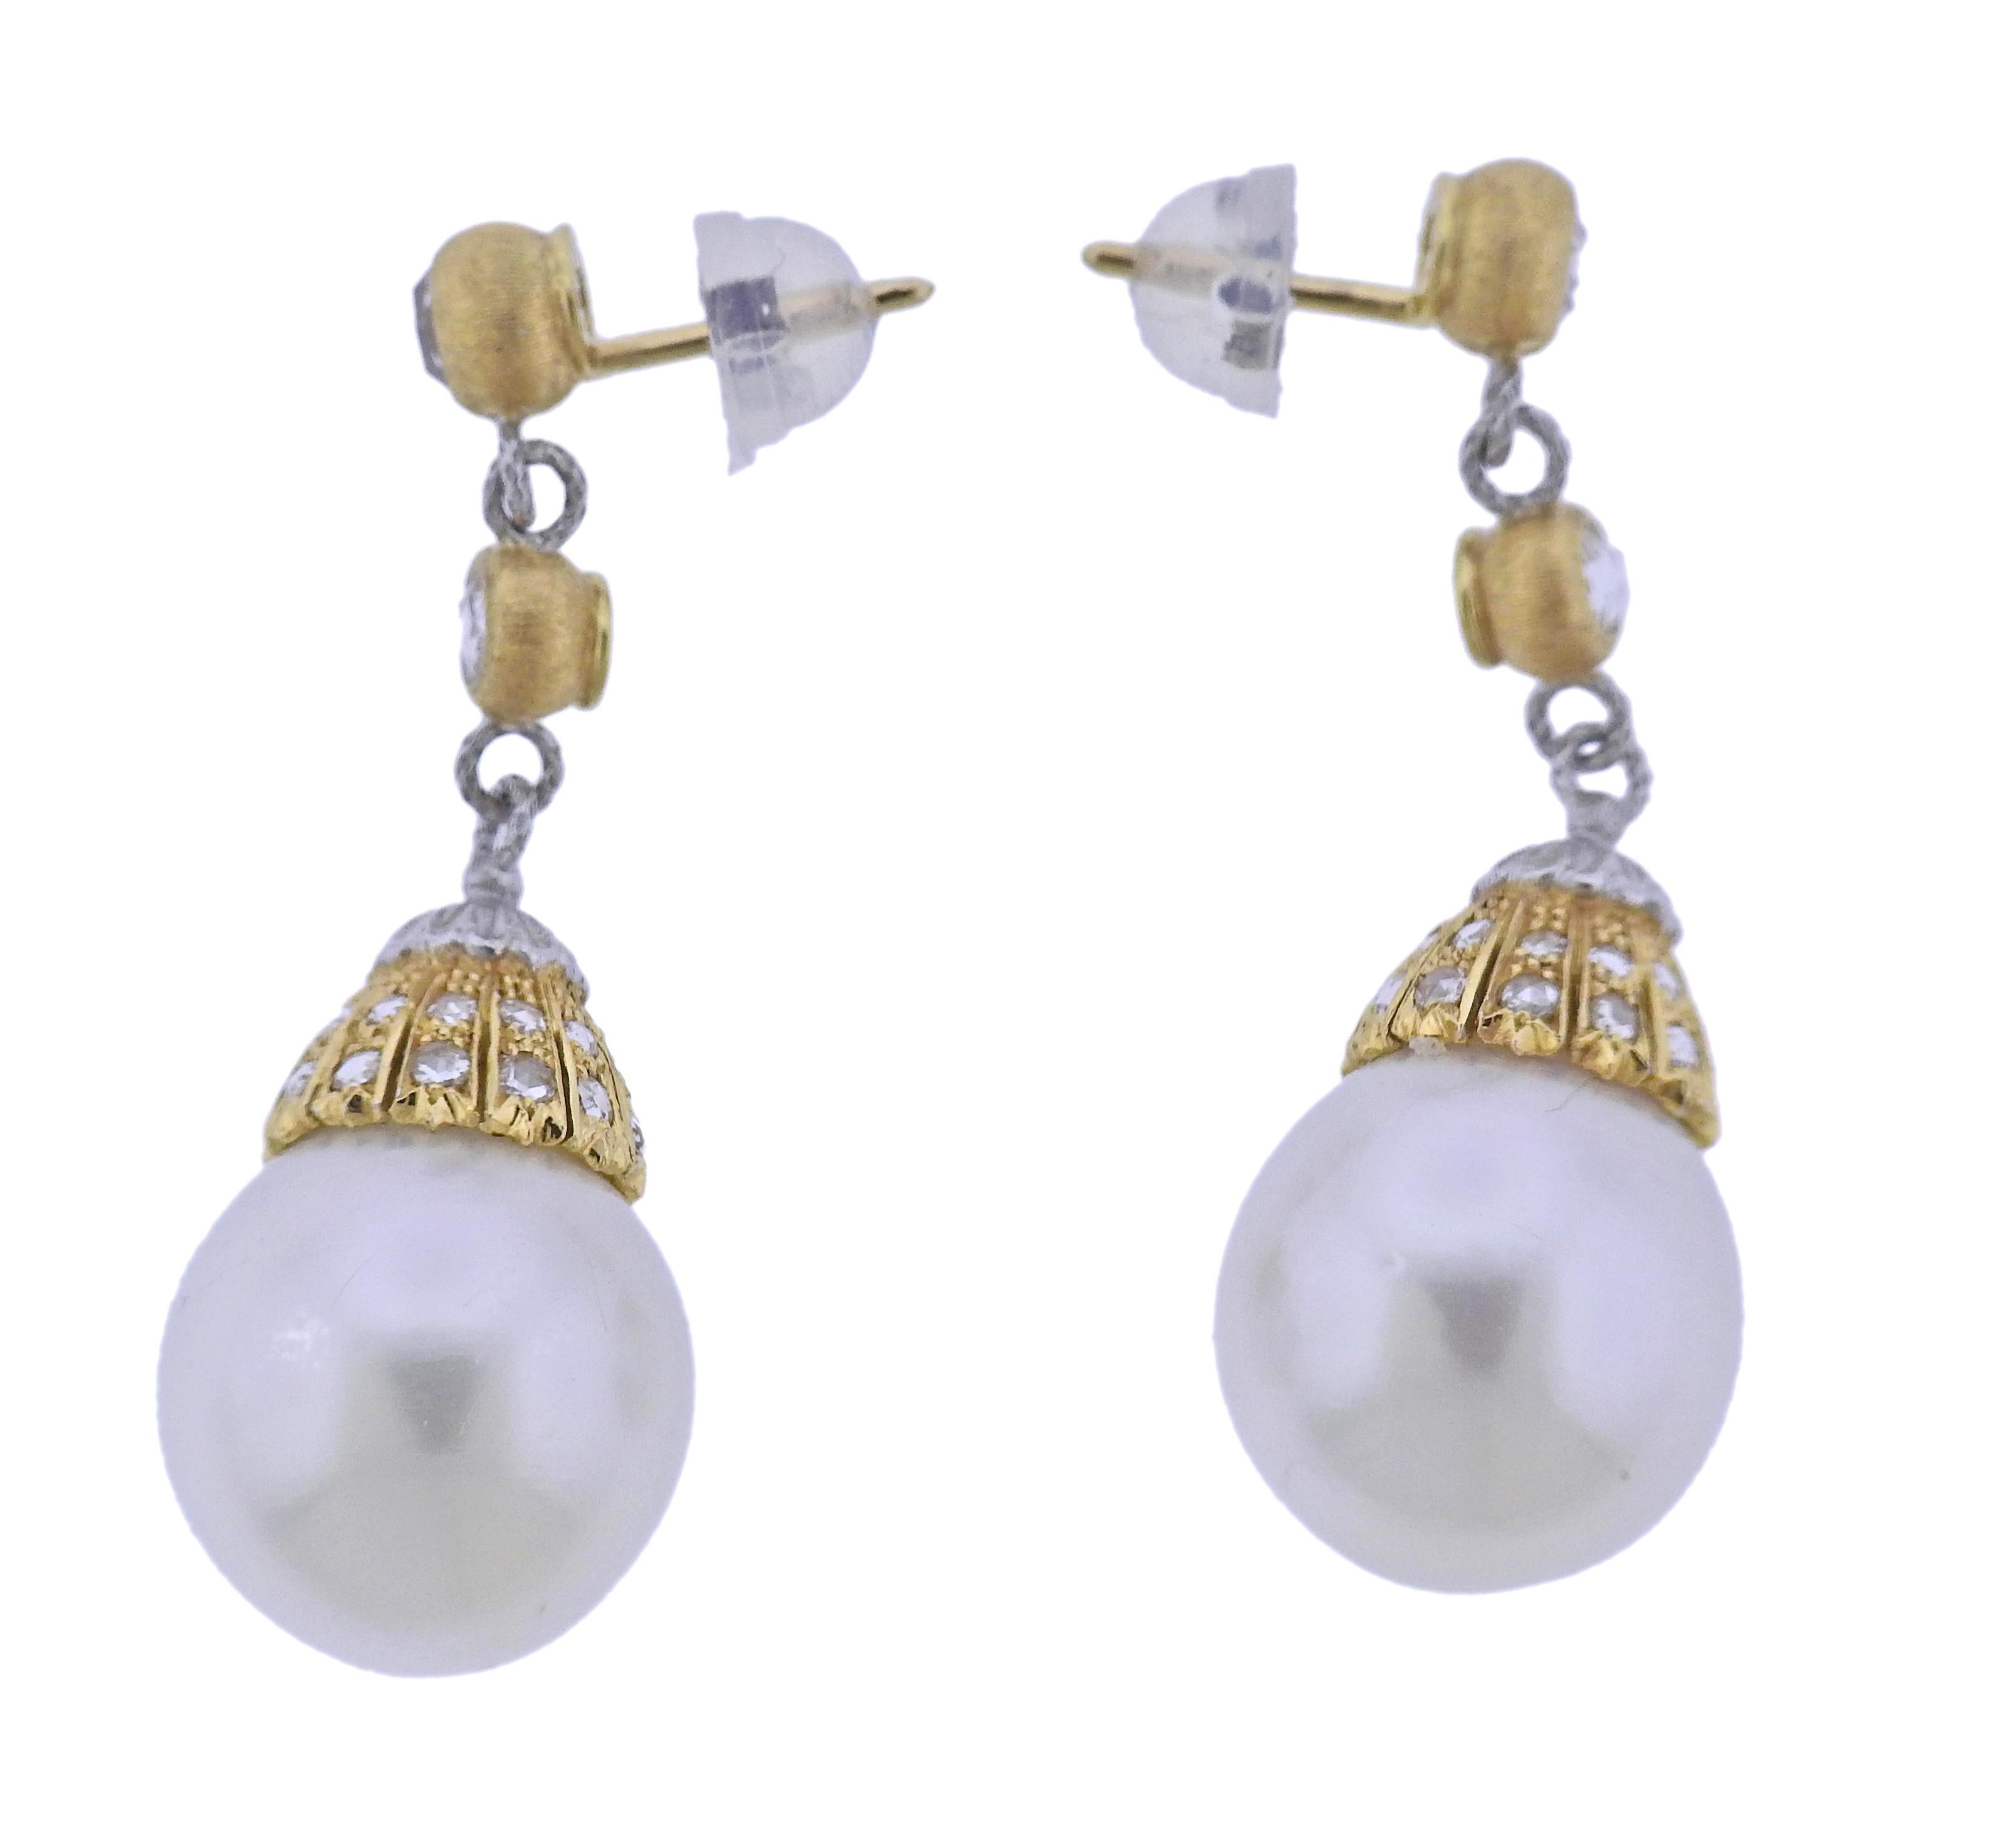 Pair of 18k gold drop earrings by Buccellati, set with 13.8mm South Sea pearls and rose cut diamonds. Earrings are 39mm long. Backs are silver, not original.  Weight - 14.4 grams. Marked Buccellati, 18k, Italy. 